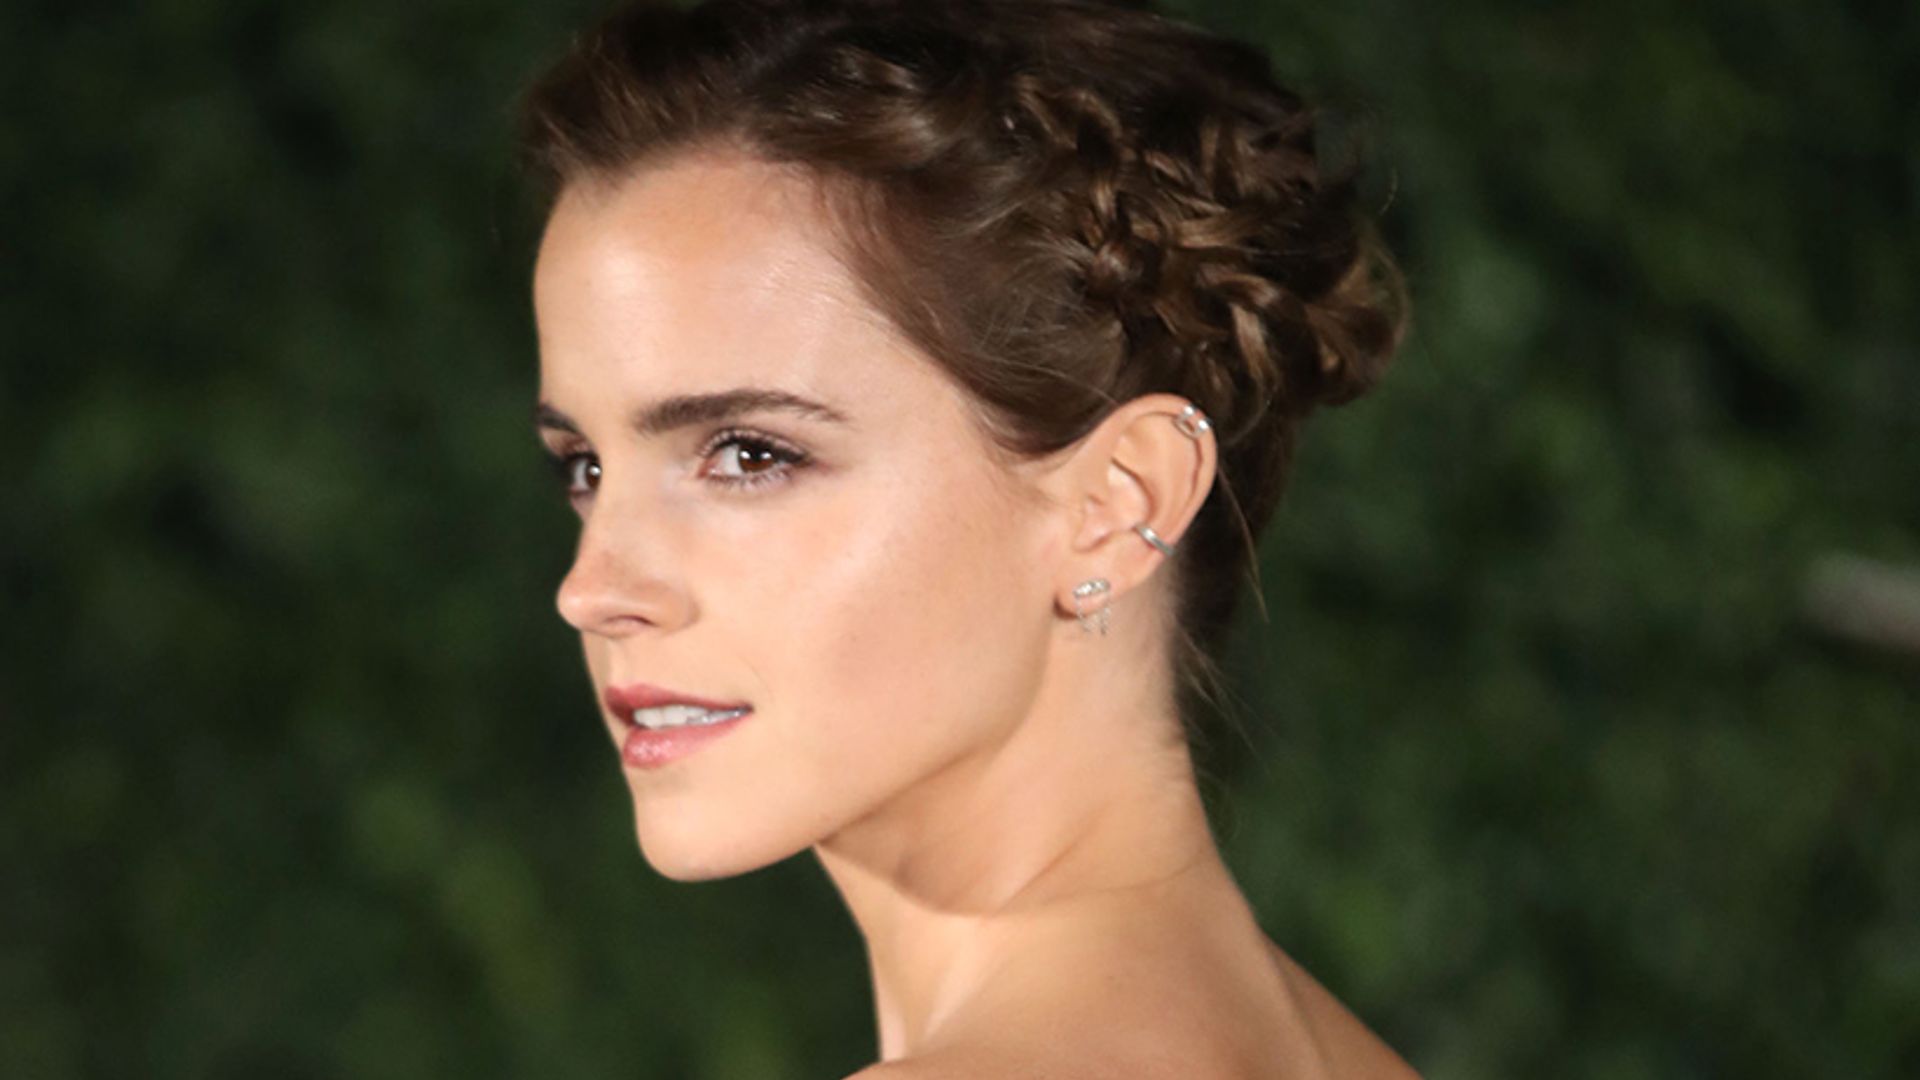 52 Top Photos Emma Watson Black Hair : Princess Emma Watson Dyed Her Hair Dark And It S The Perfect Transition To Winter Hellogiggles